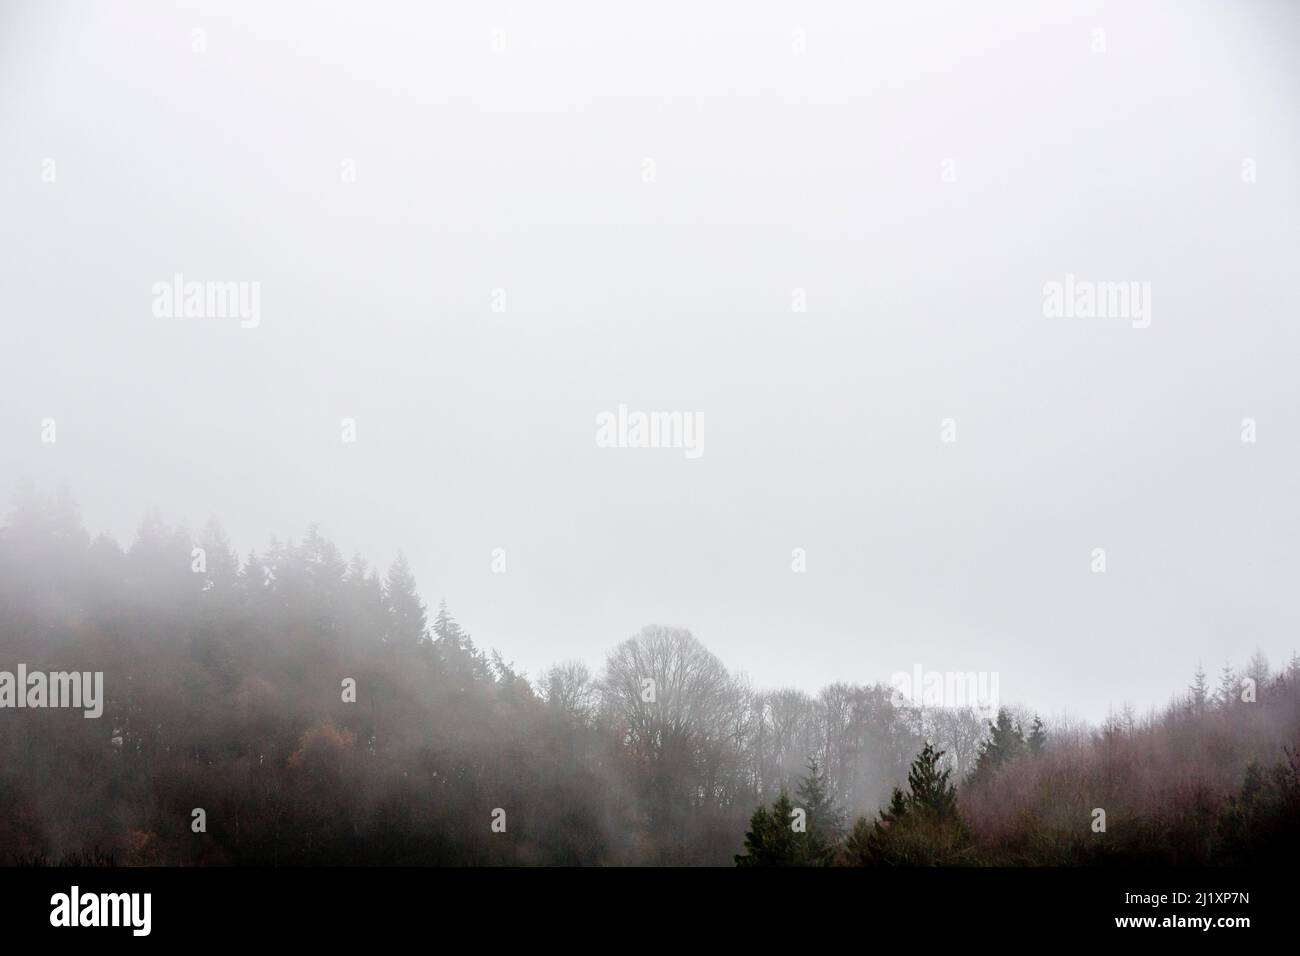 leafless winter trees shrouded in mist and fog. Stock Photo